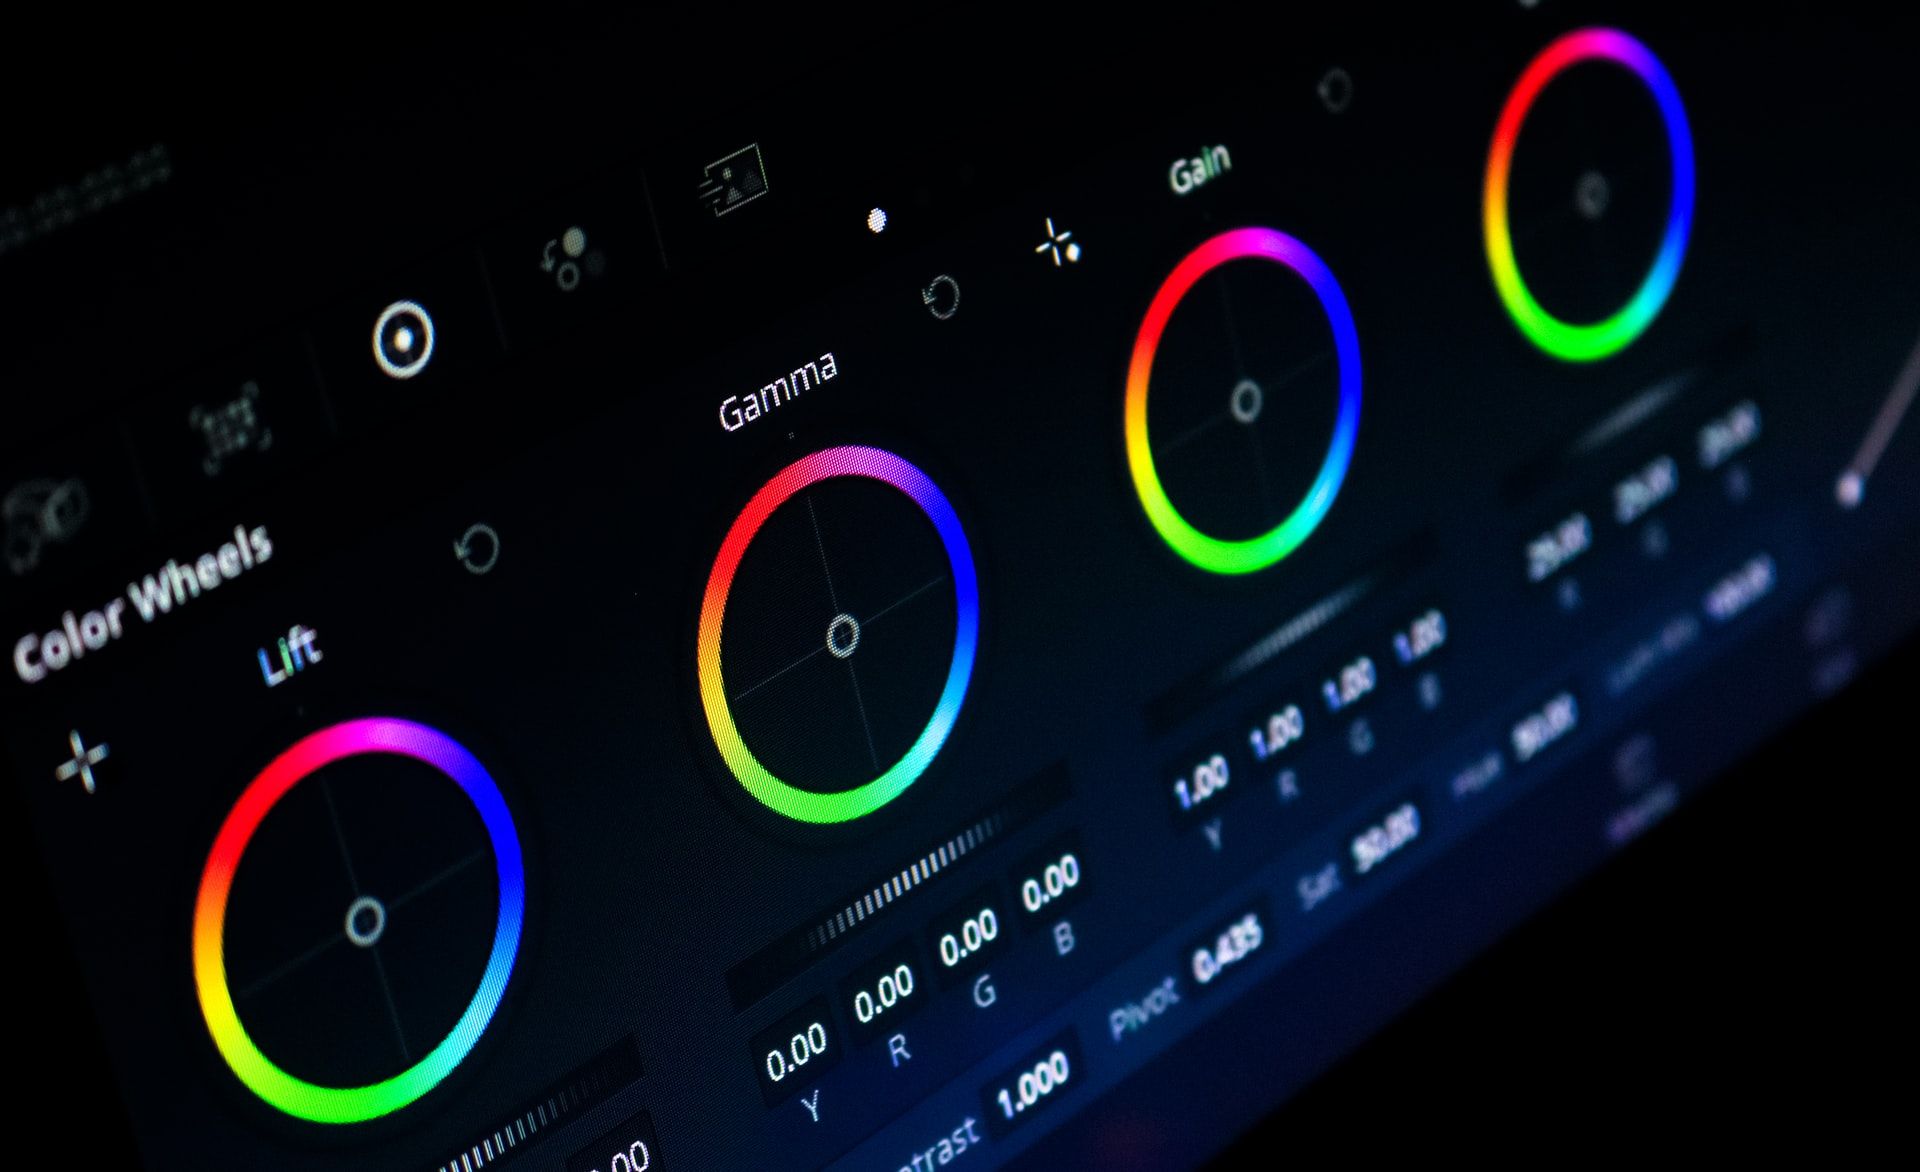 How to Use Color Grading in Photoshop, Premiere Pro and DaVinci Resolve